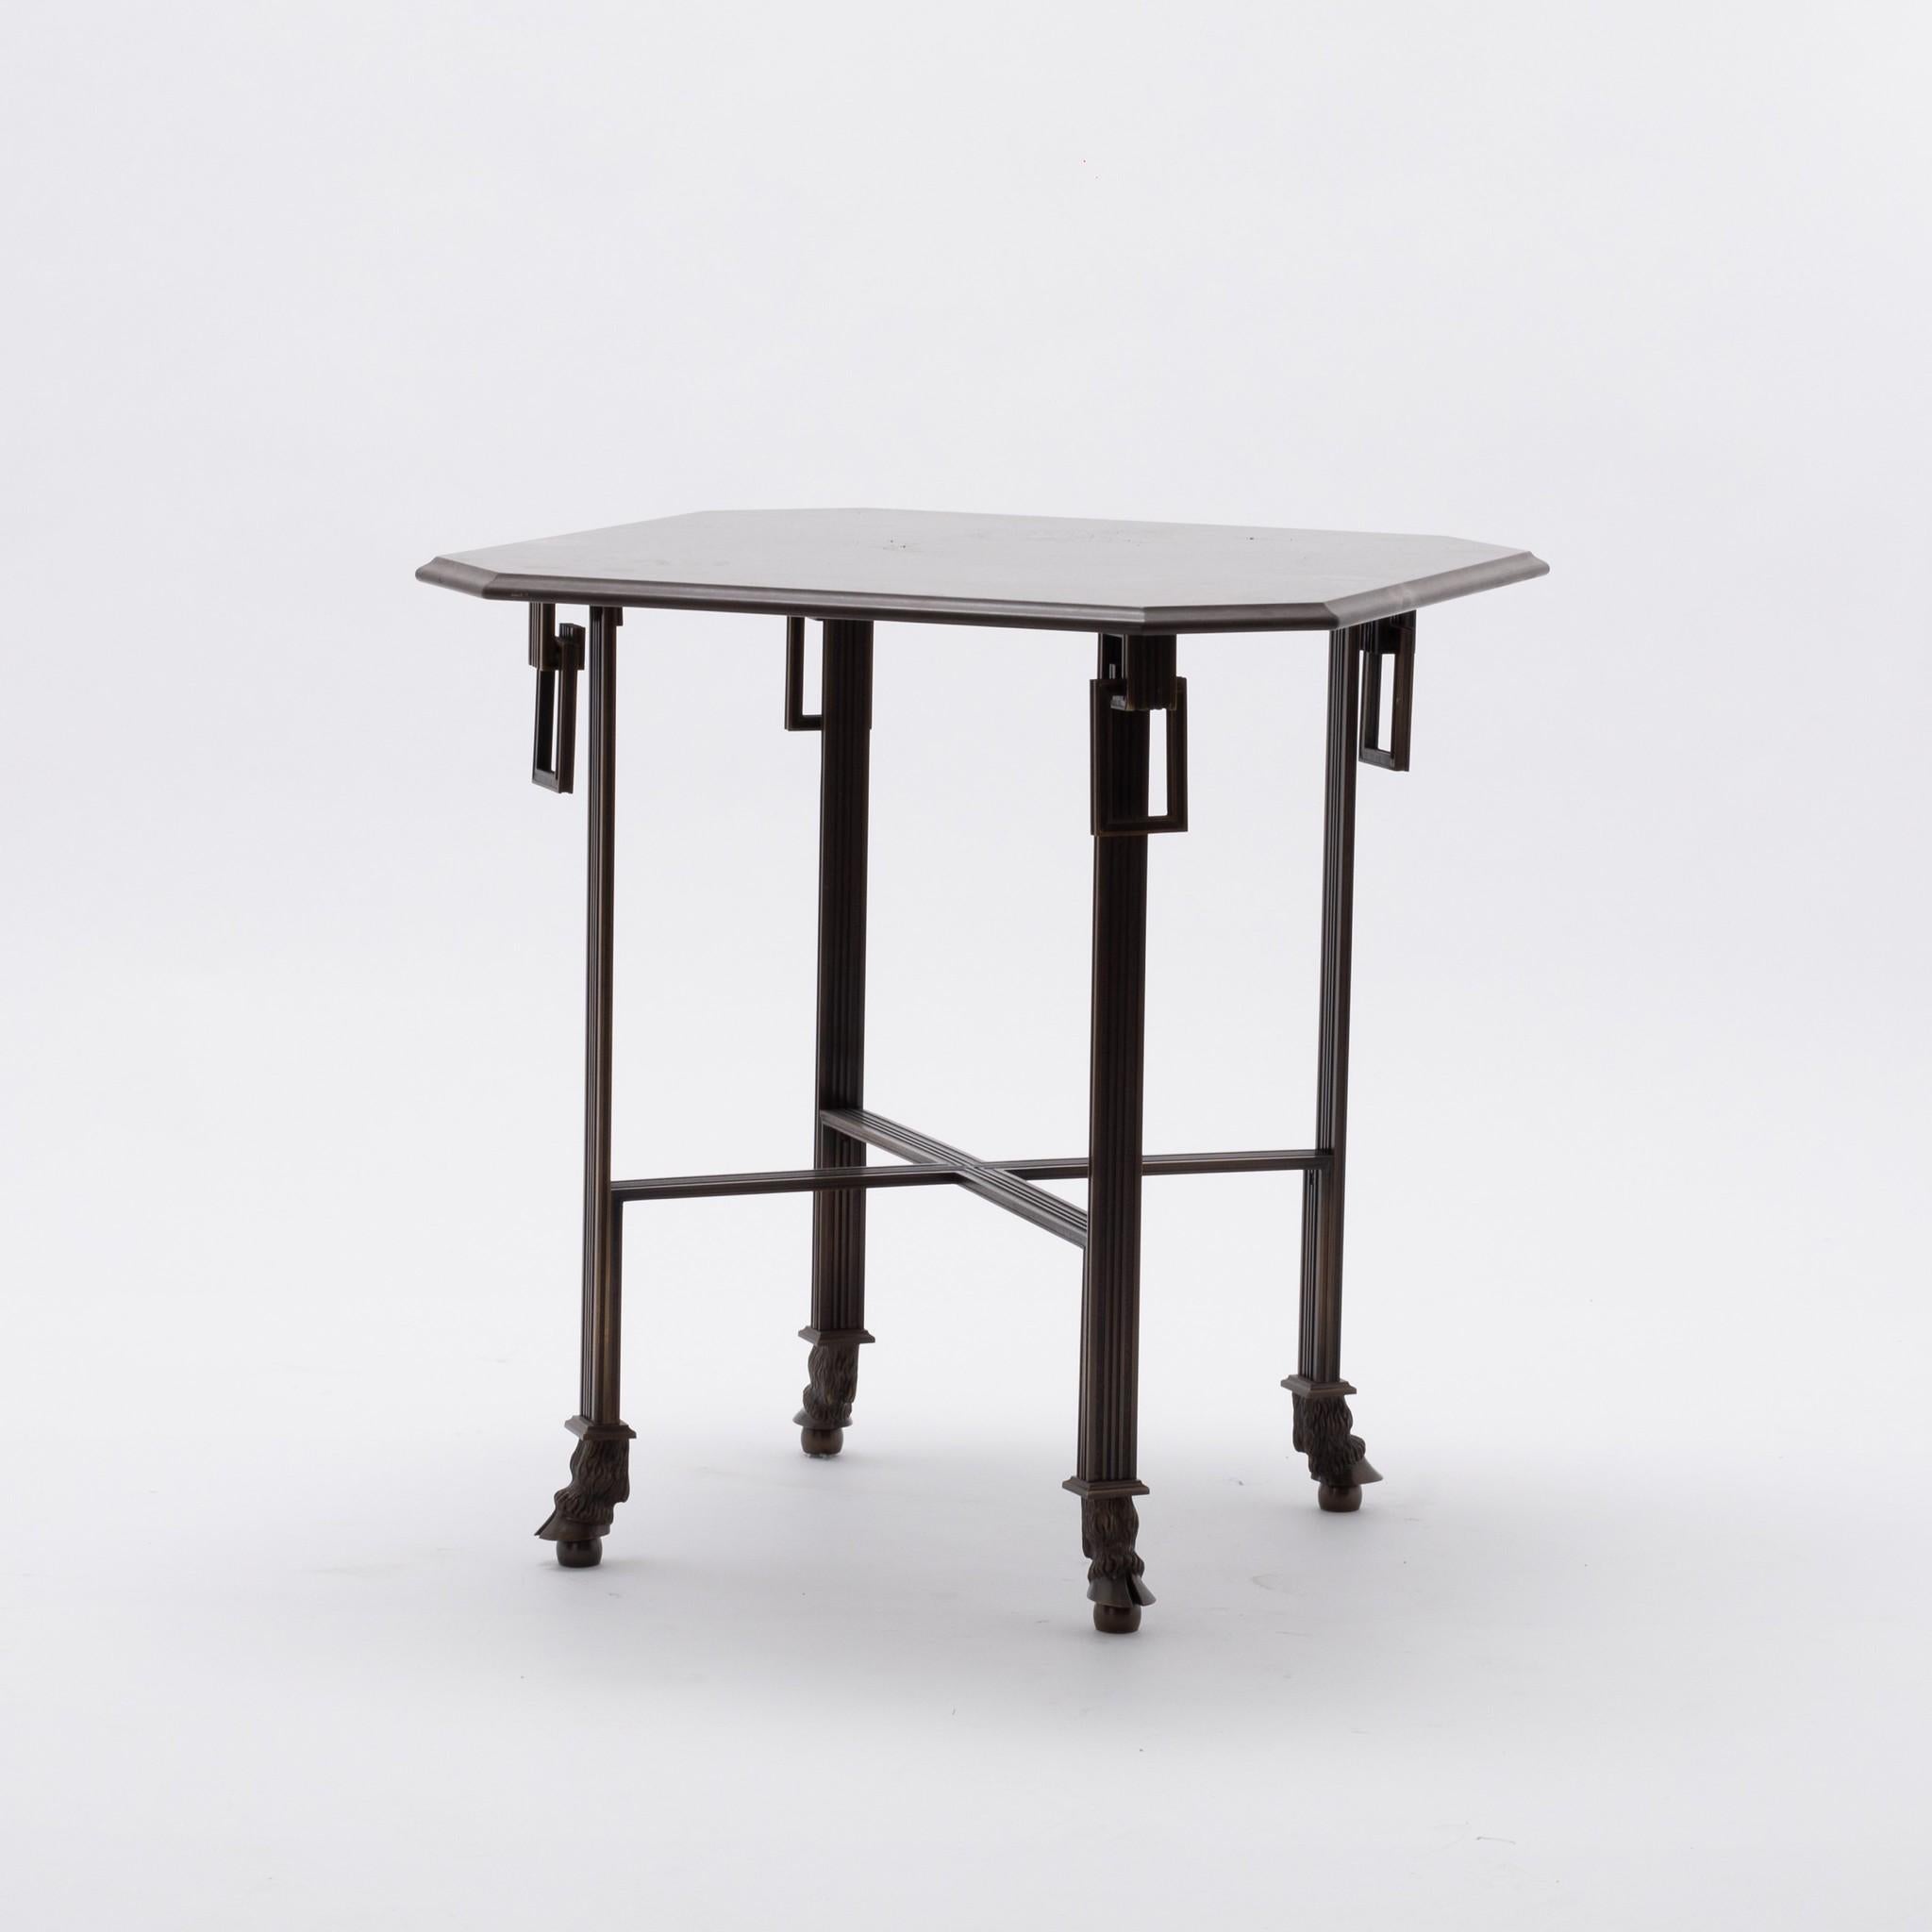 Pair Paul Ferrante Edward bronze end tables with Louis XVI style fluted legs, rectangular pulls, hoof sabobts and honed gray brown marble tops.